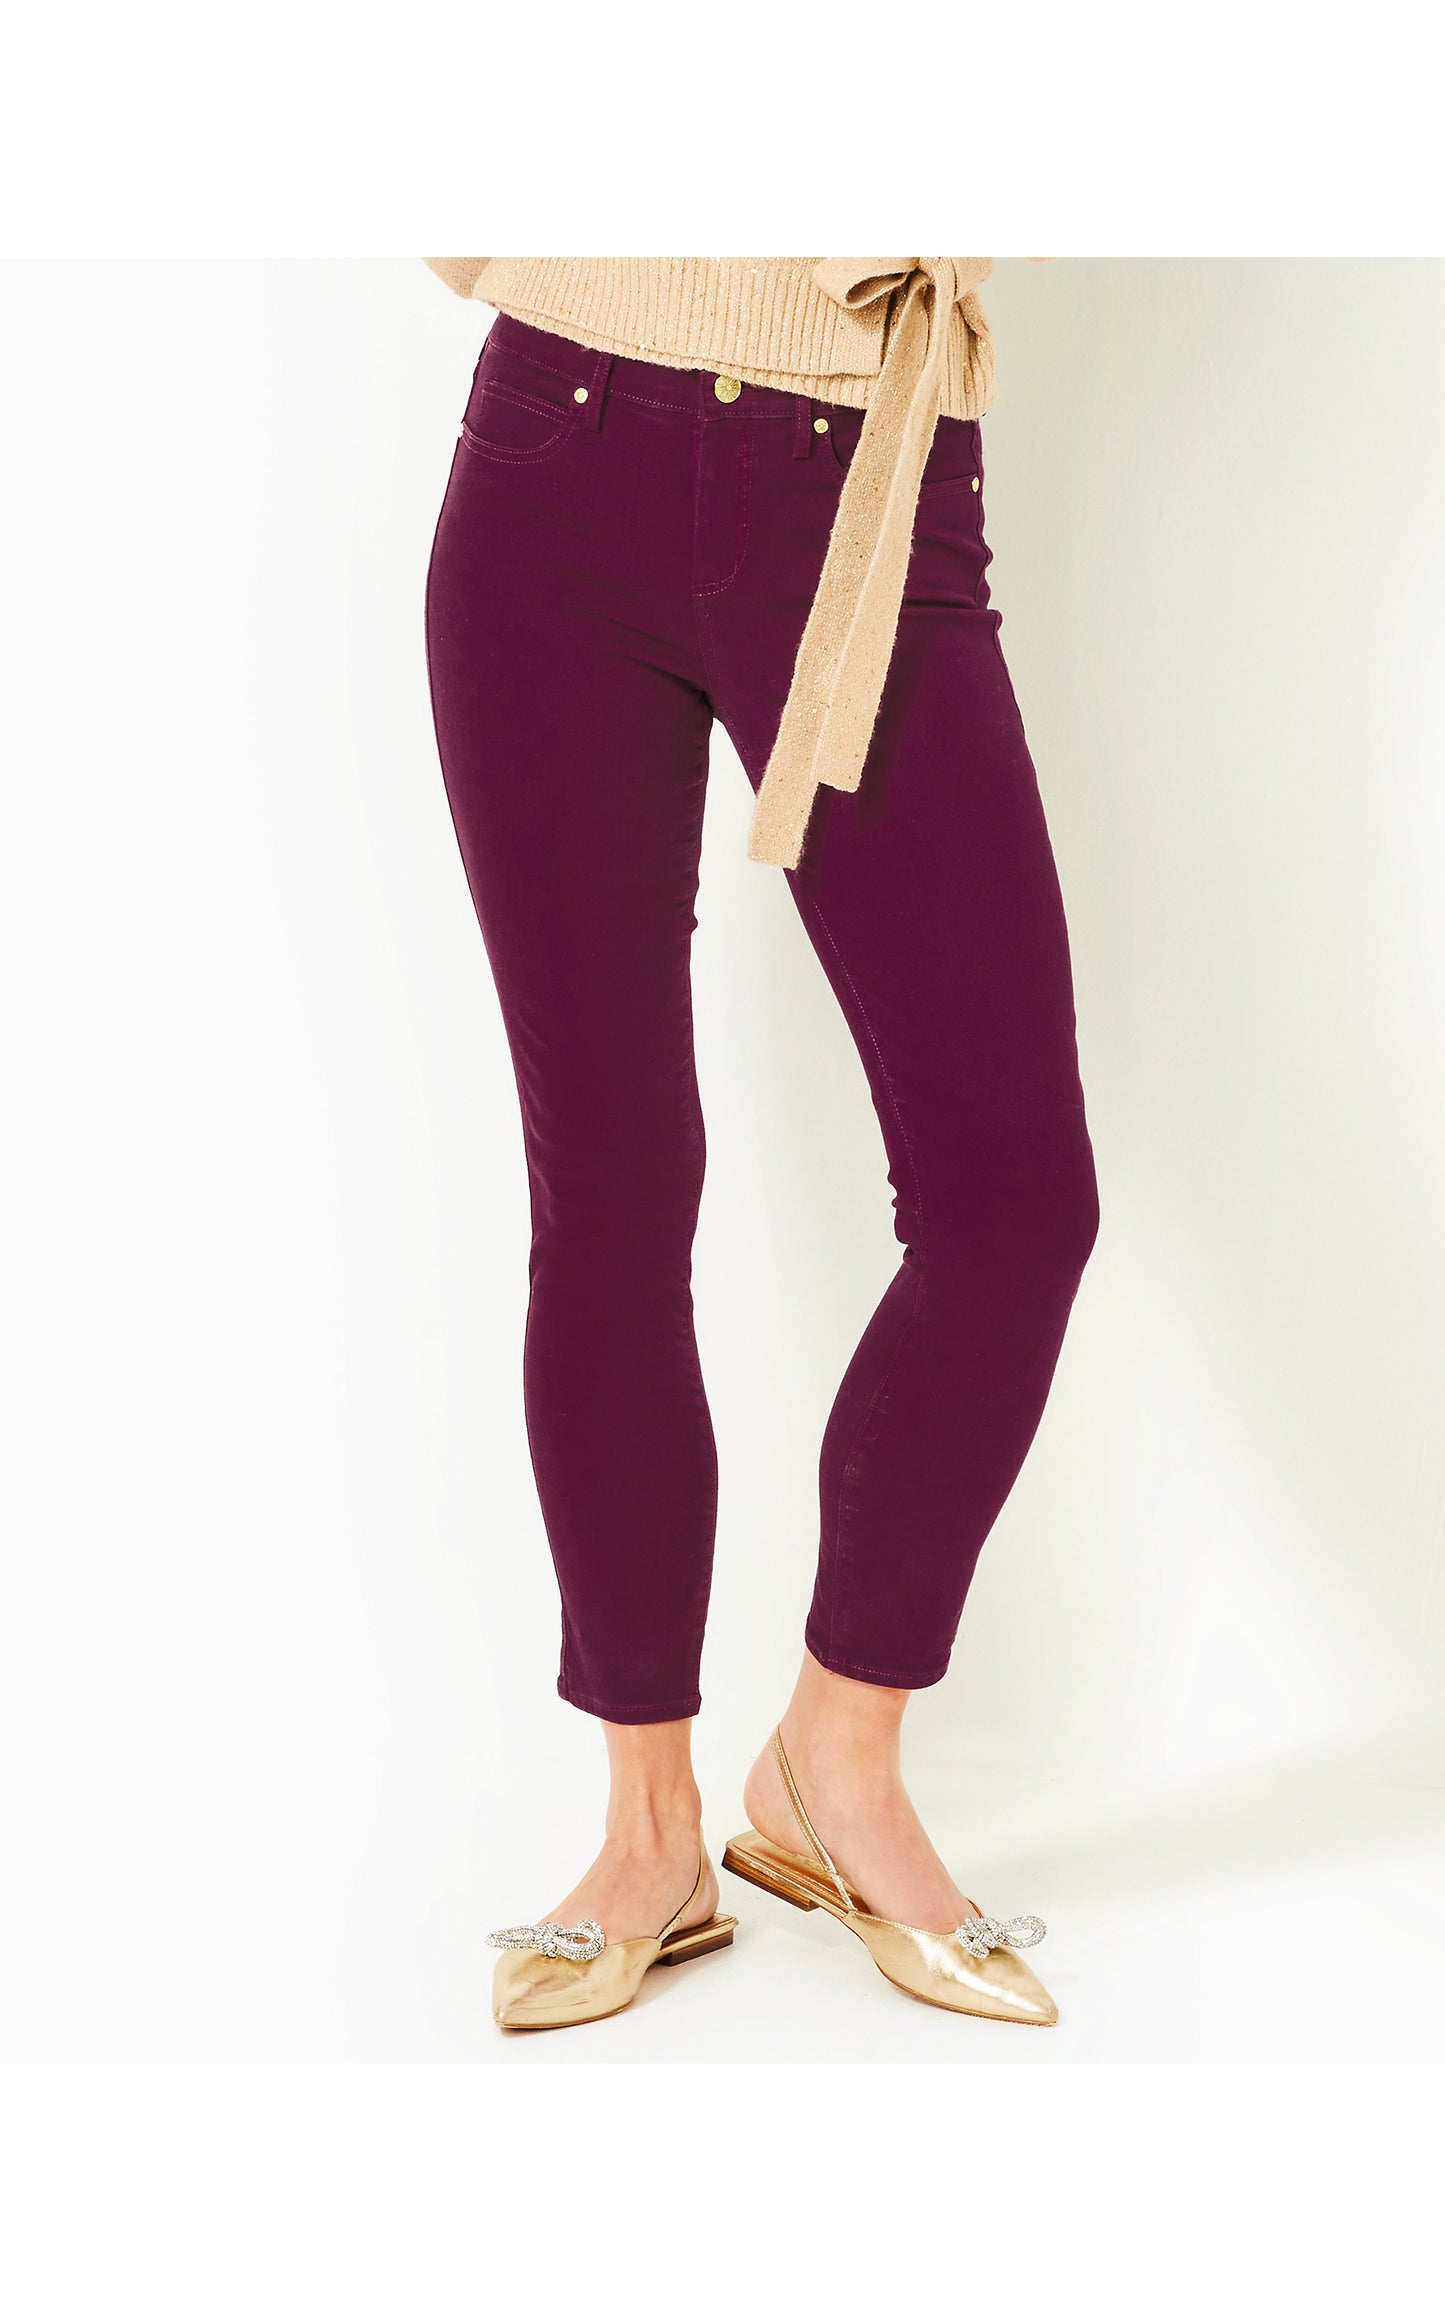 South Ocean High Rise Skinny Jeans in Amarena Cherry